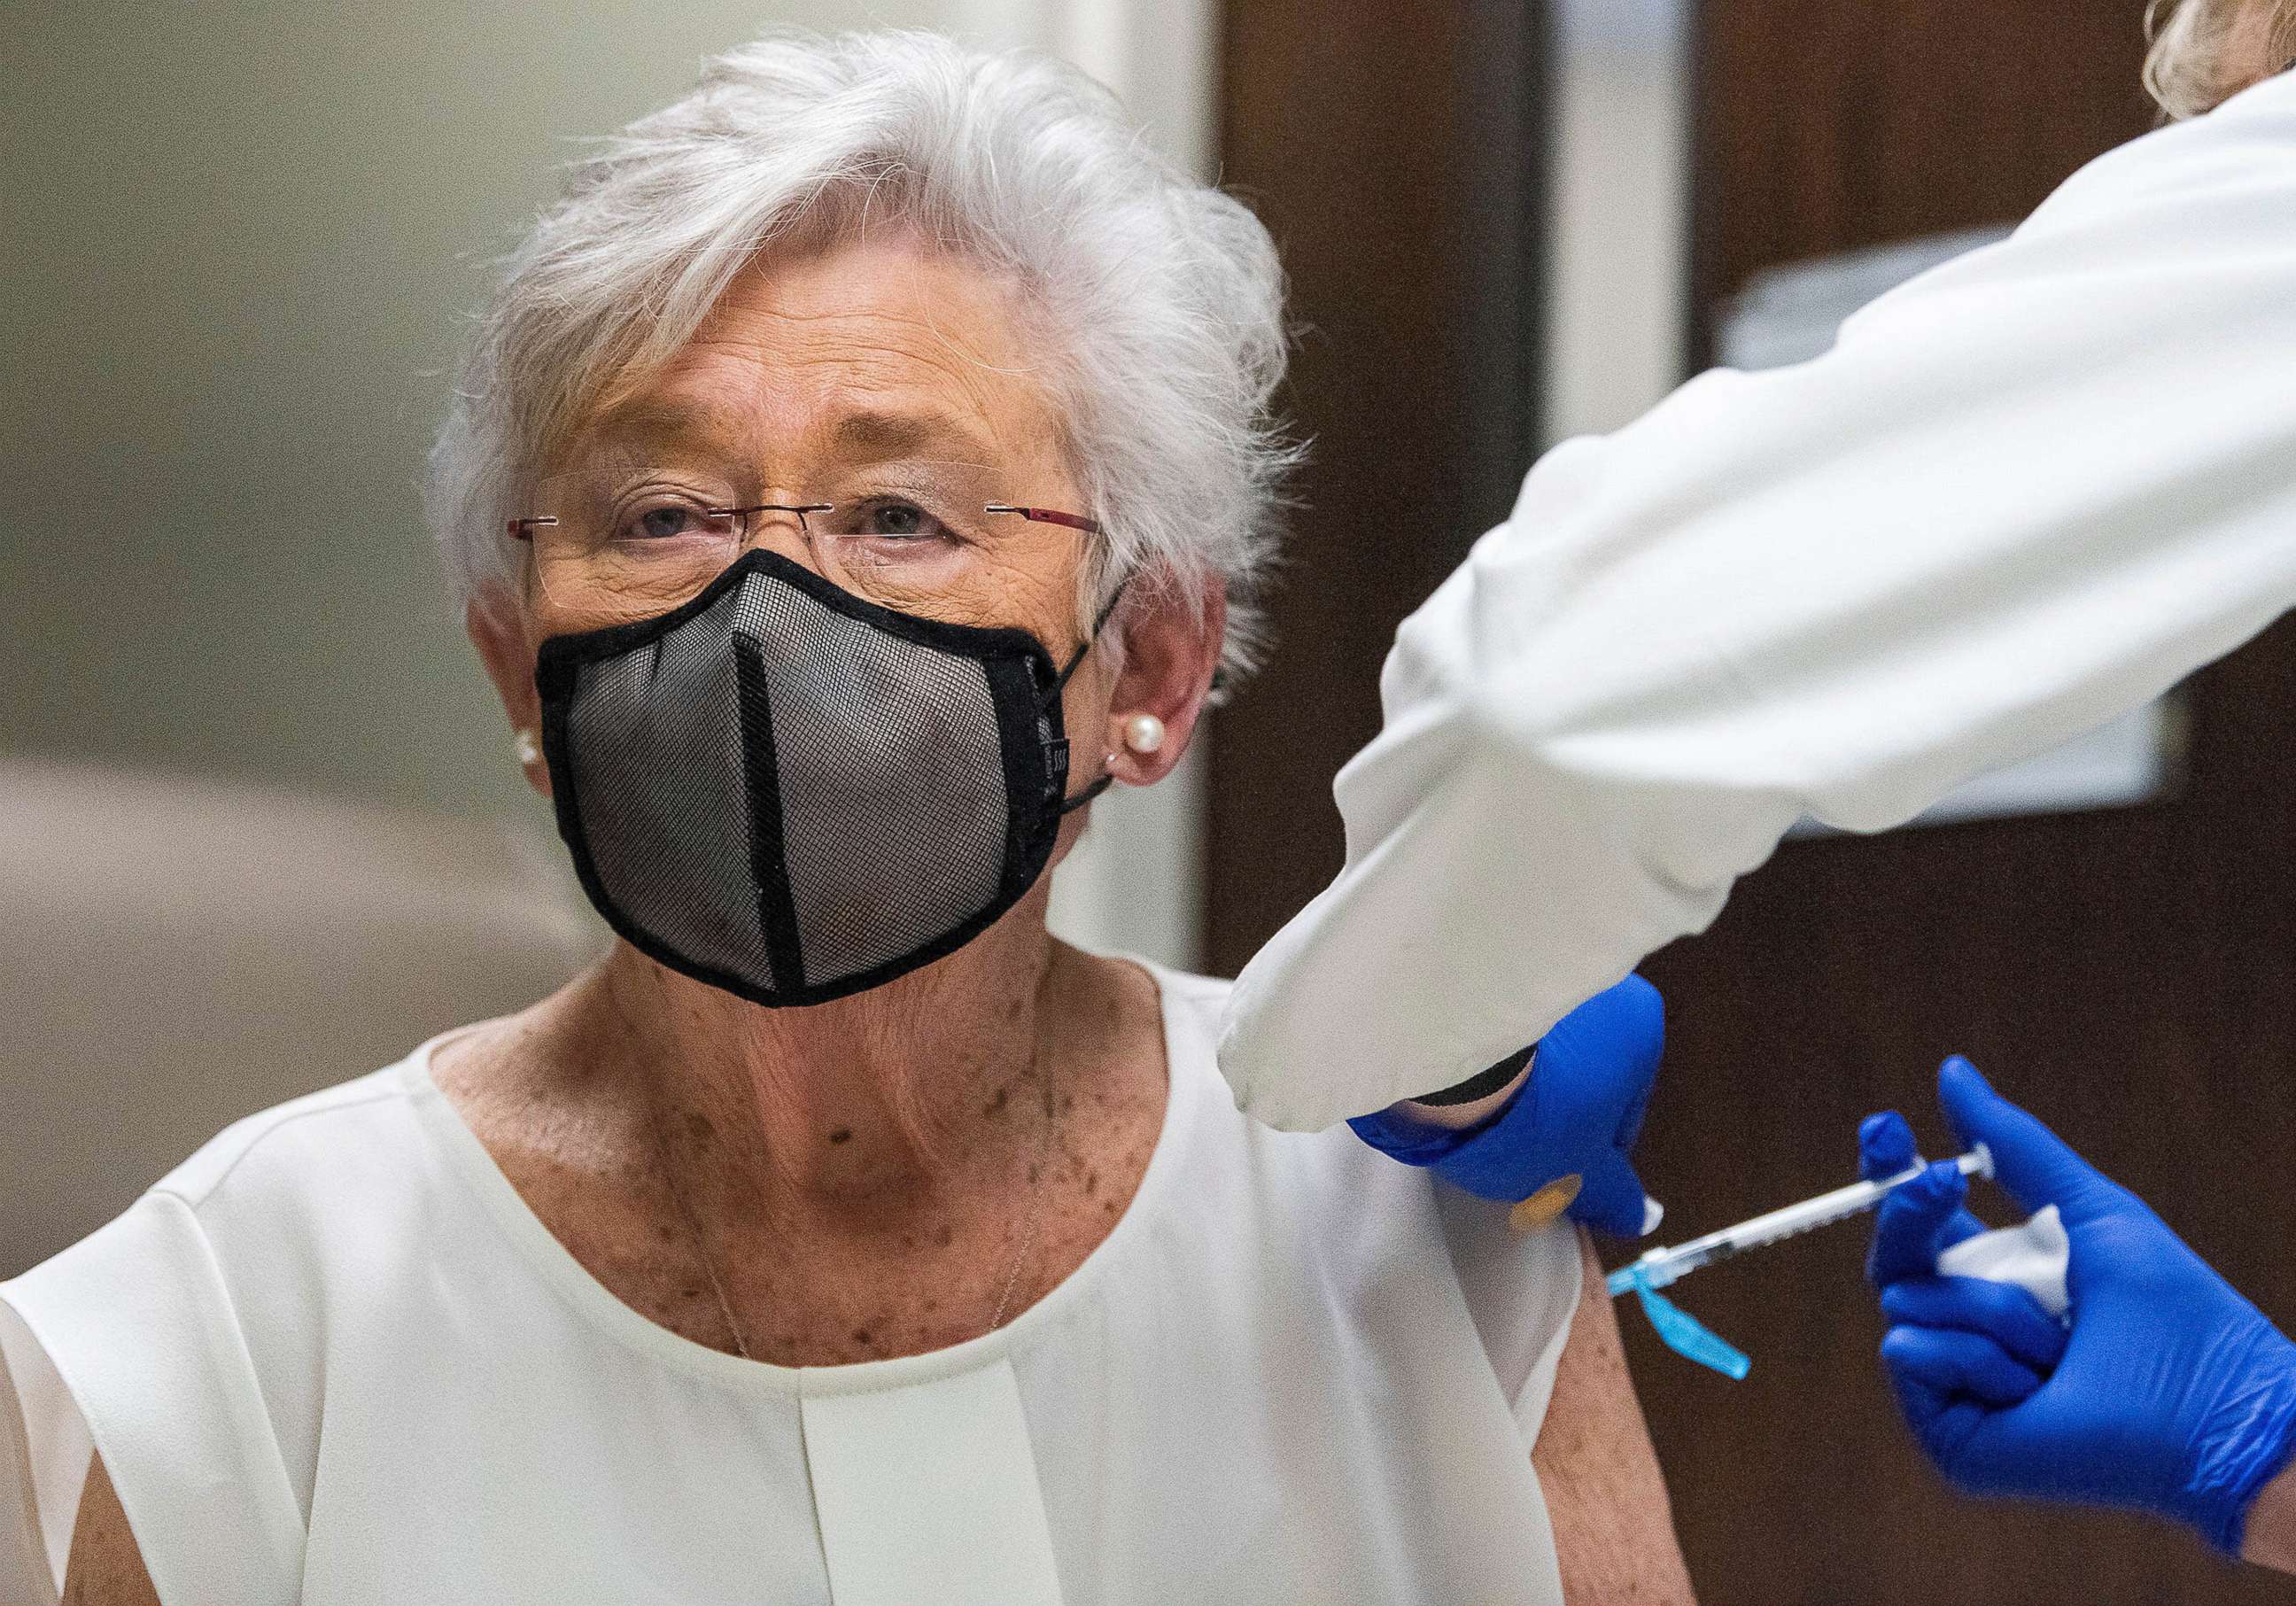 PHOTO: Alabama Governor Kay Ivey receives her second COVID-19 vaccine shot at Baptist Medical Center South in Montgomery, Ala., on Tuesday January 12, 2021.
